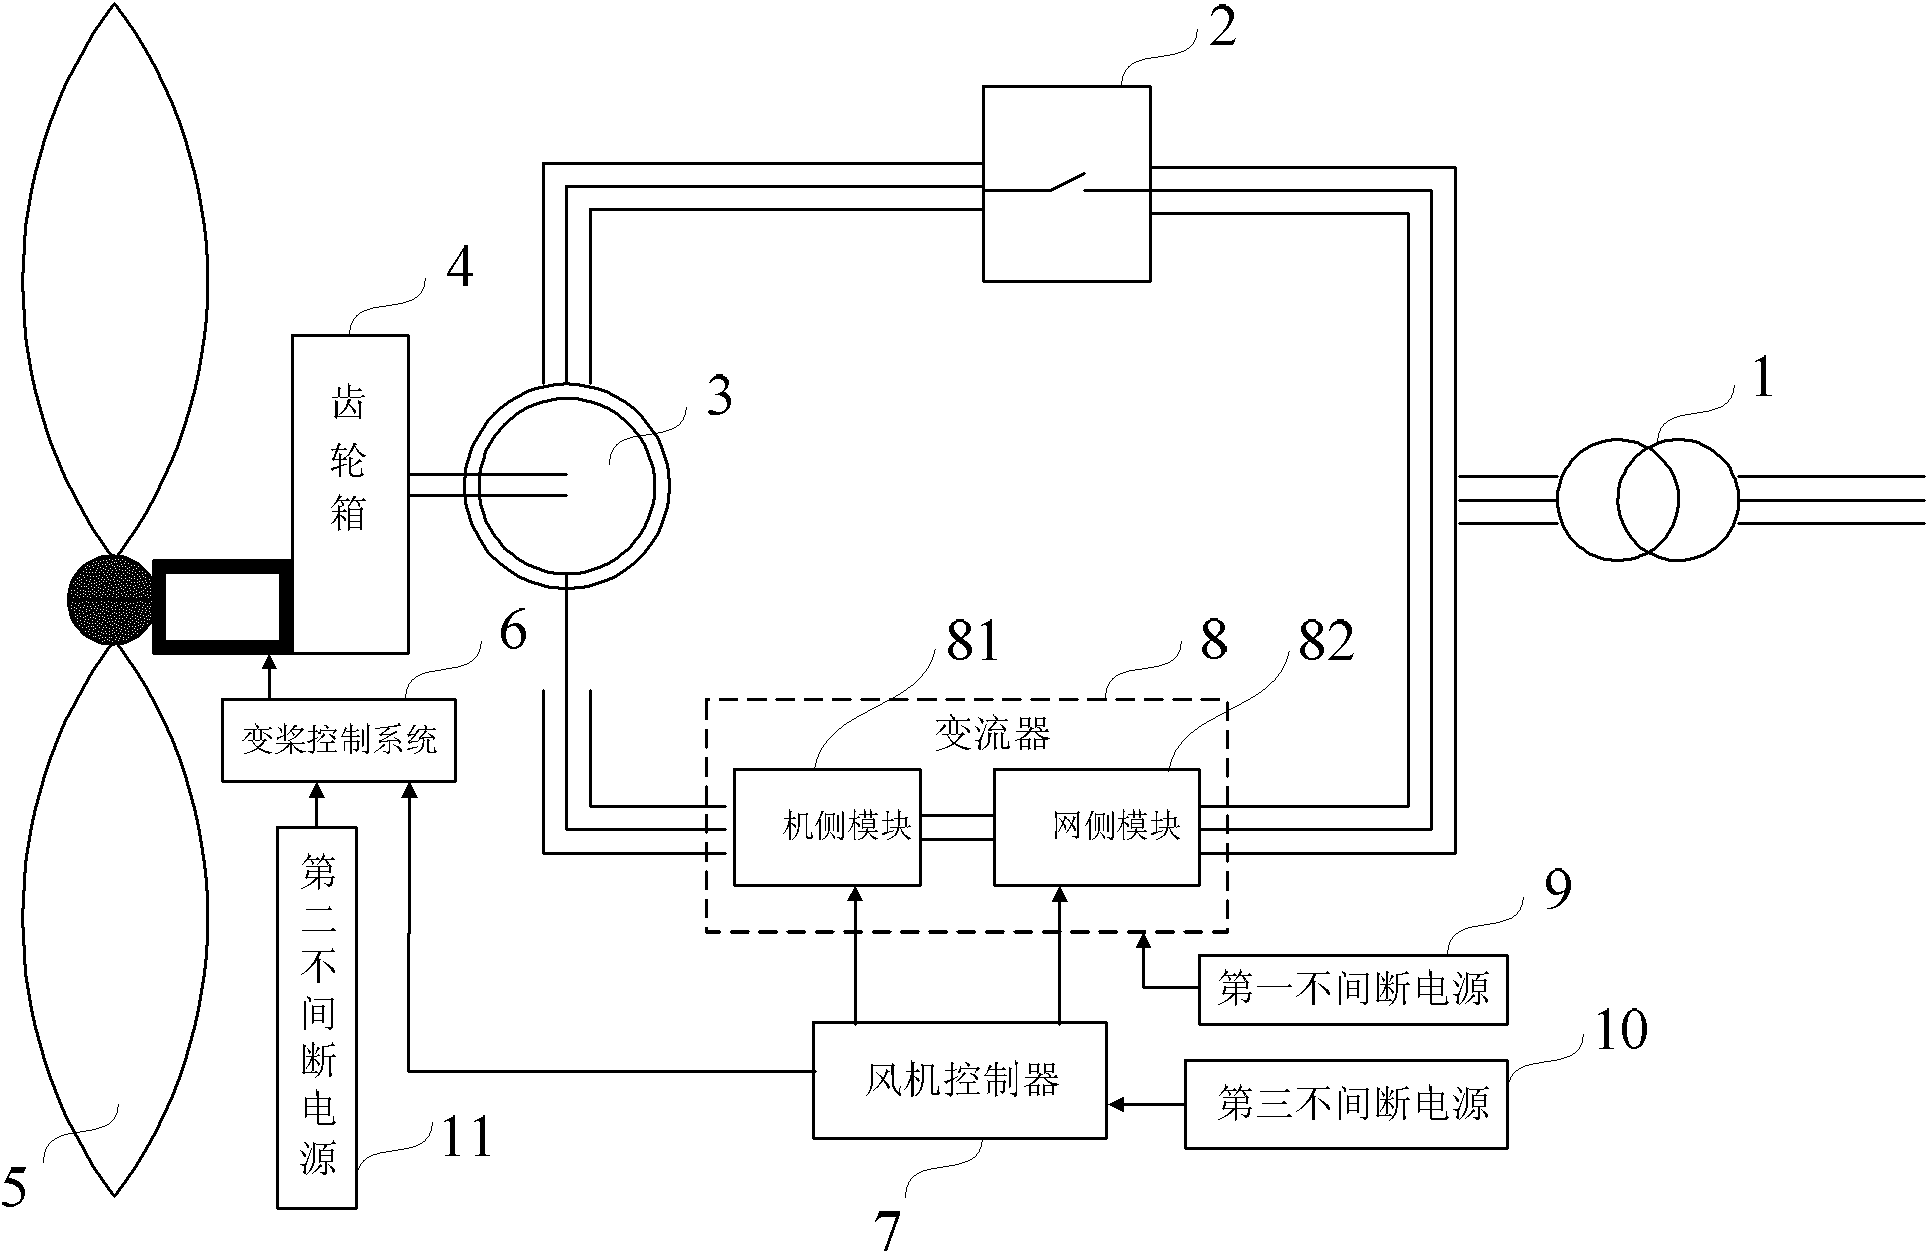 Low-voltage ride-through distributed power supply system and wind generating set